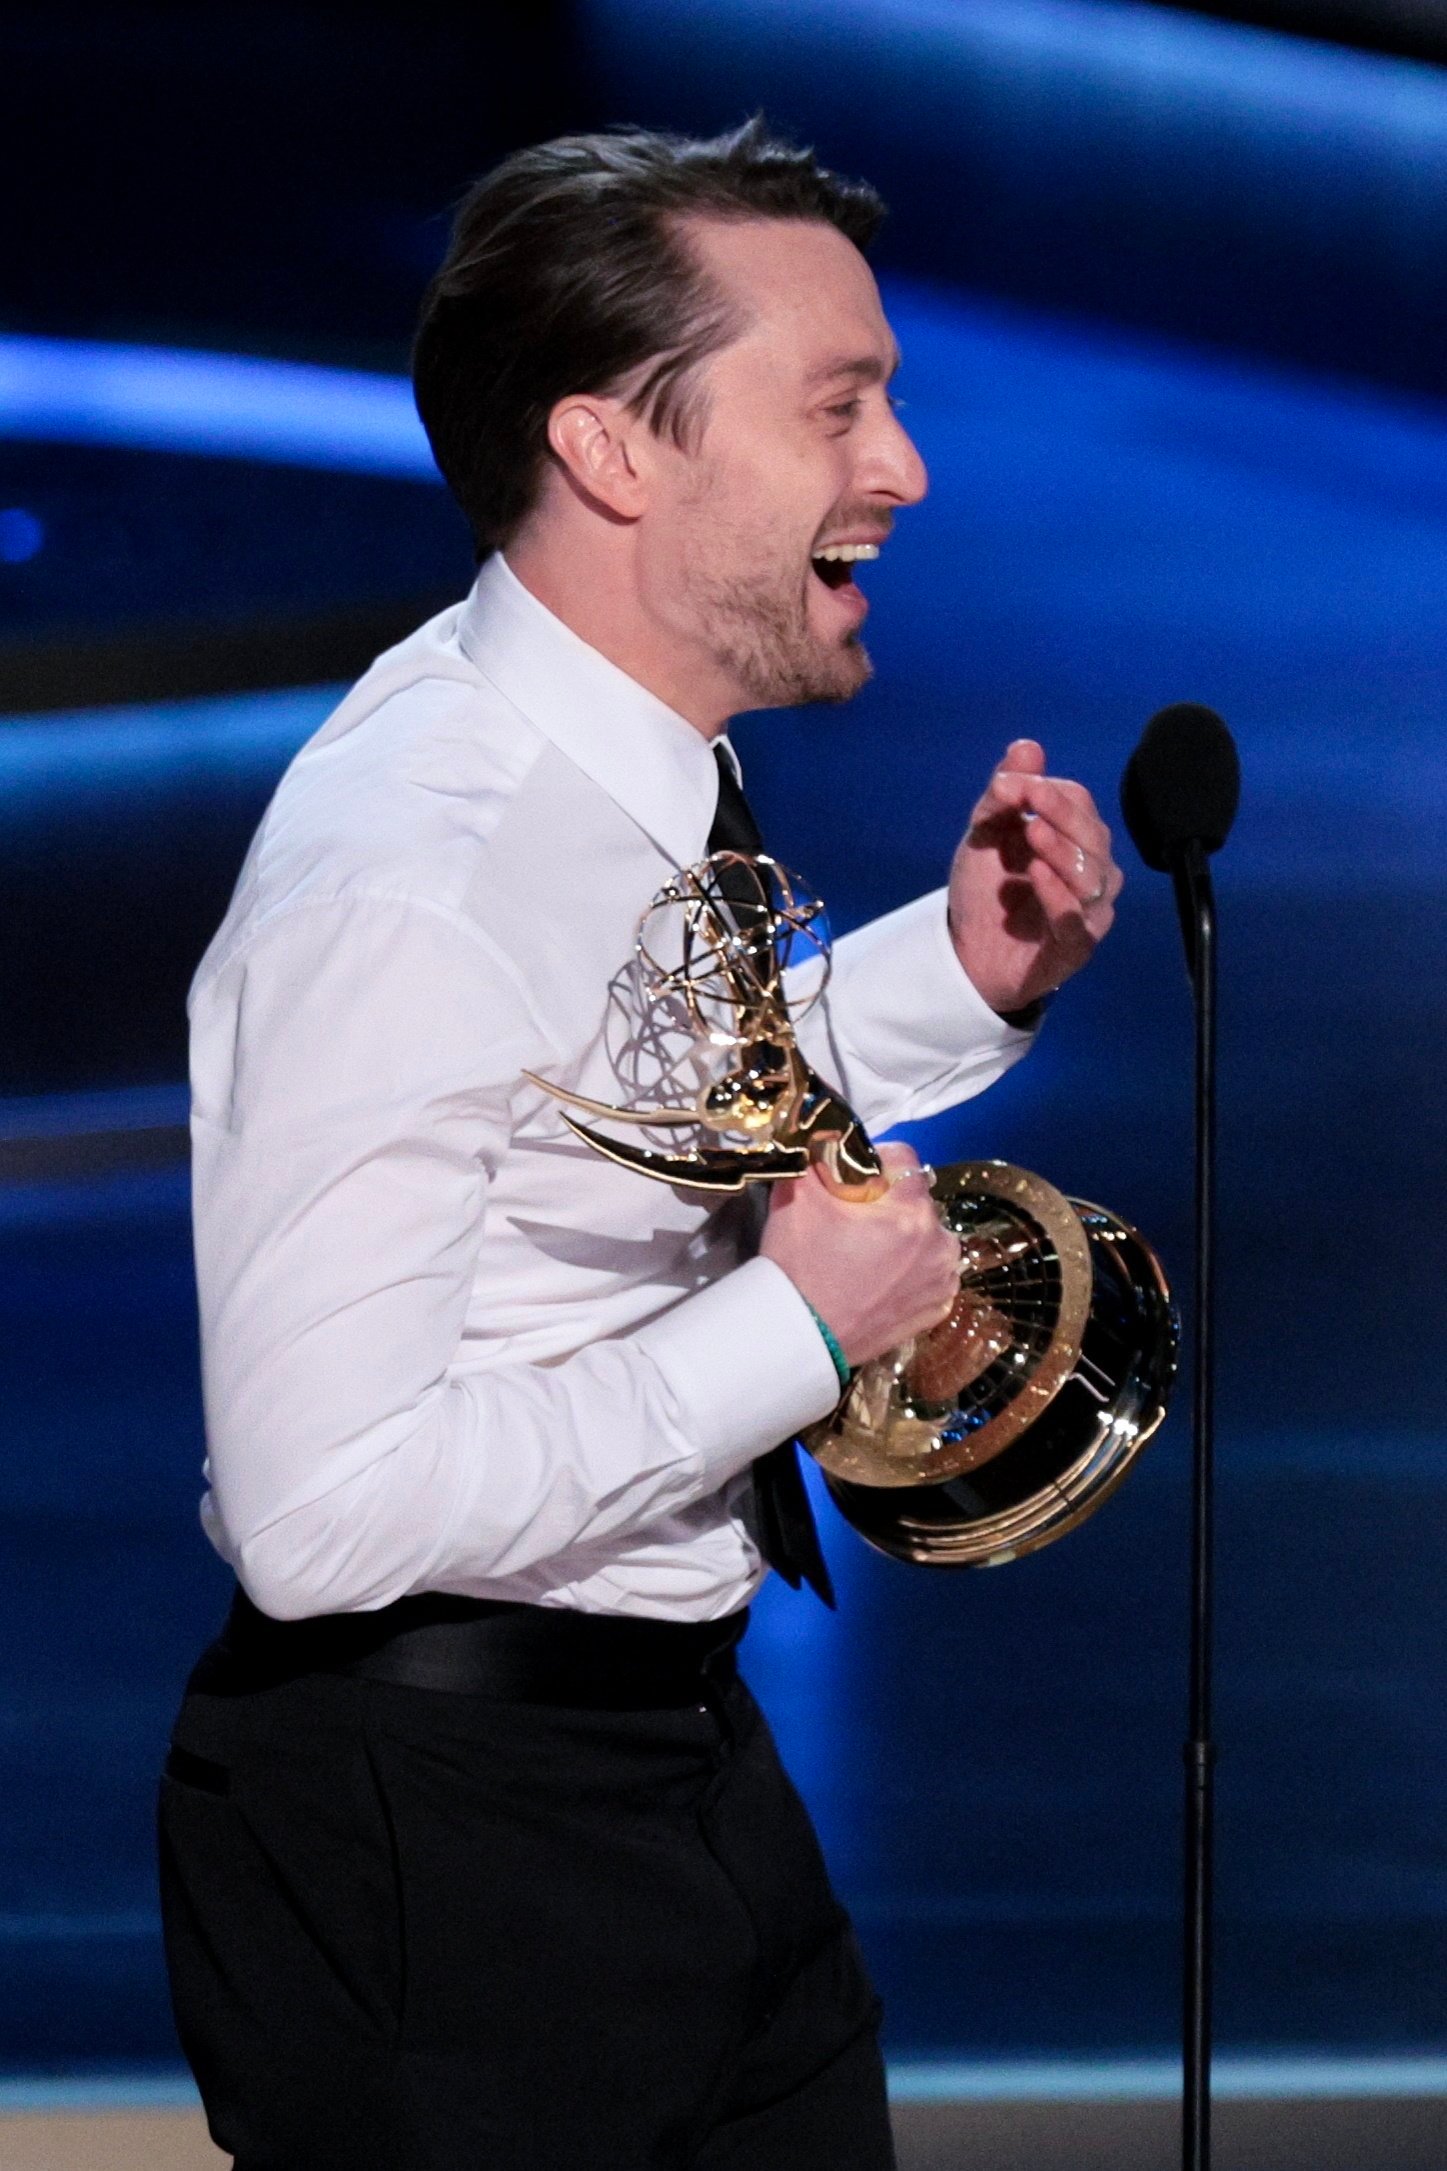 US actor Kieran Culkin reacts after winning best actor in a drama series for “Succession” during the 75th annual Primetime Emmy Awards ceremony. Photo: EPA-EFE